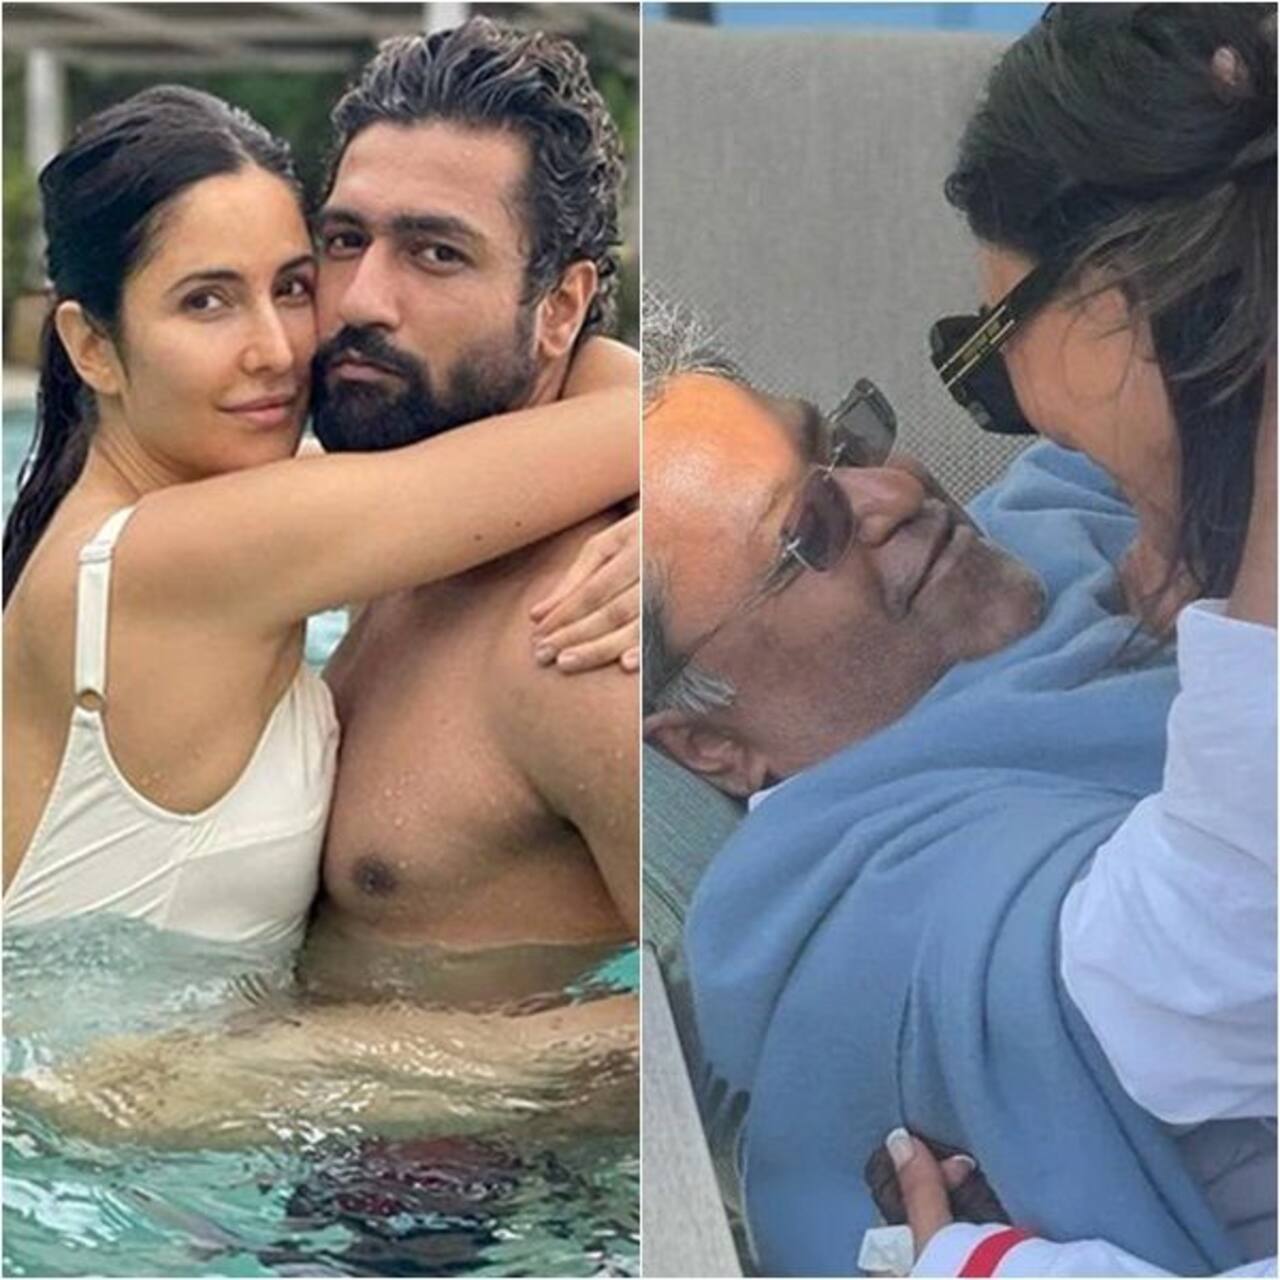 Trending Entertainment News Today: Astrologer predicts Katrina Kaif's pregnancy, adverse effects of Sushmita Sen-Lalit Modi's relationship and more